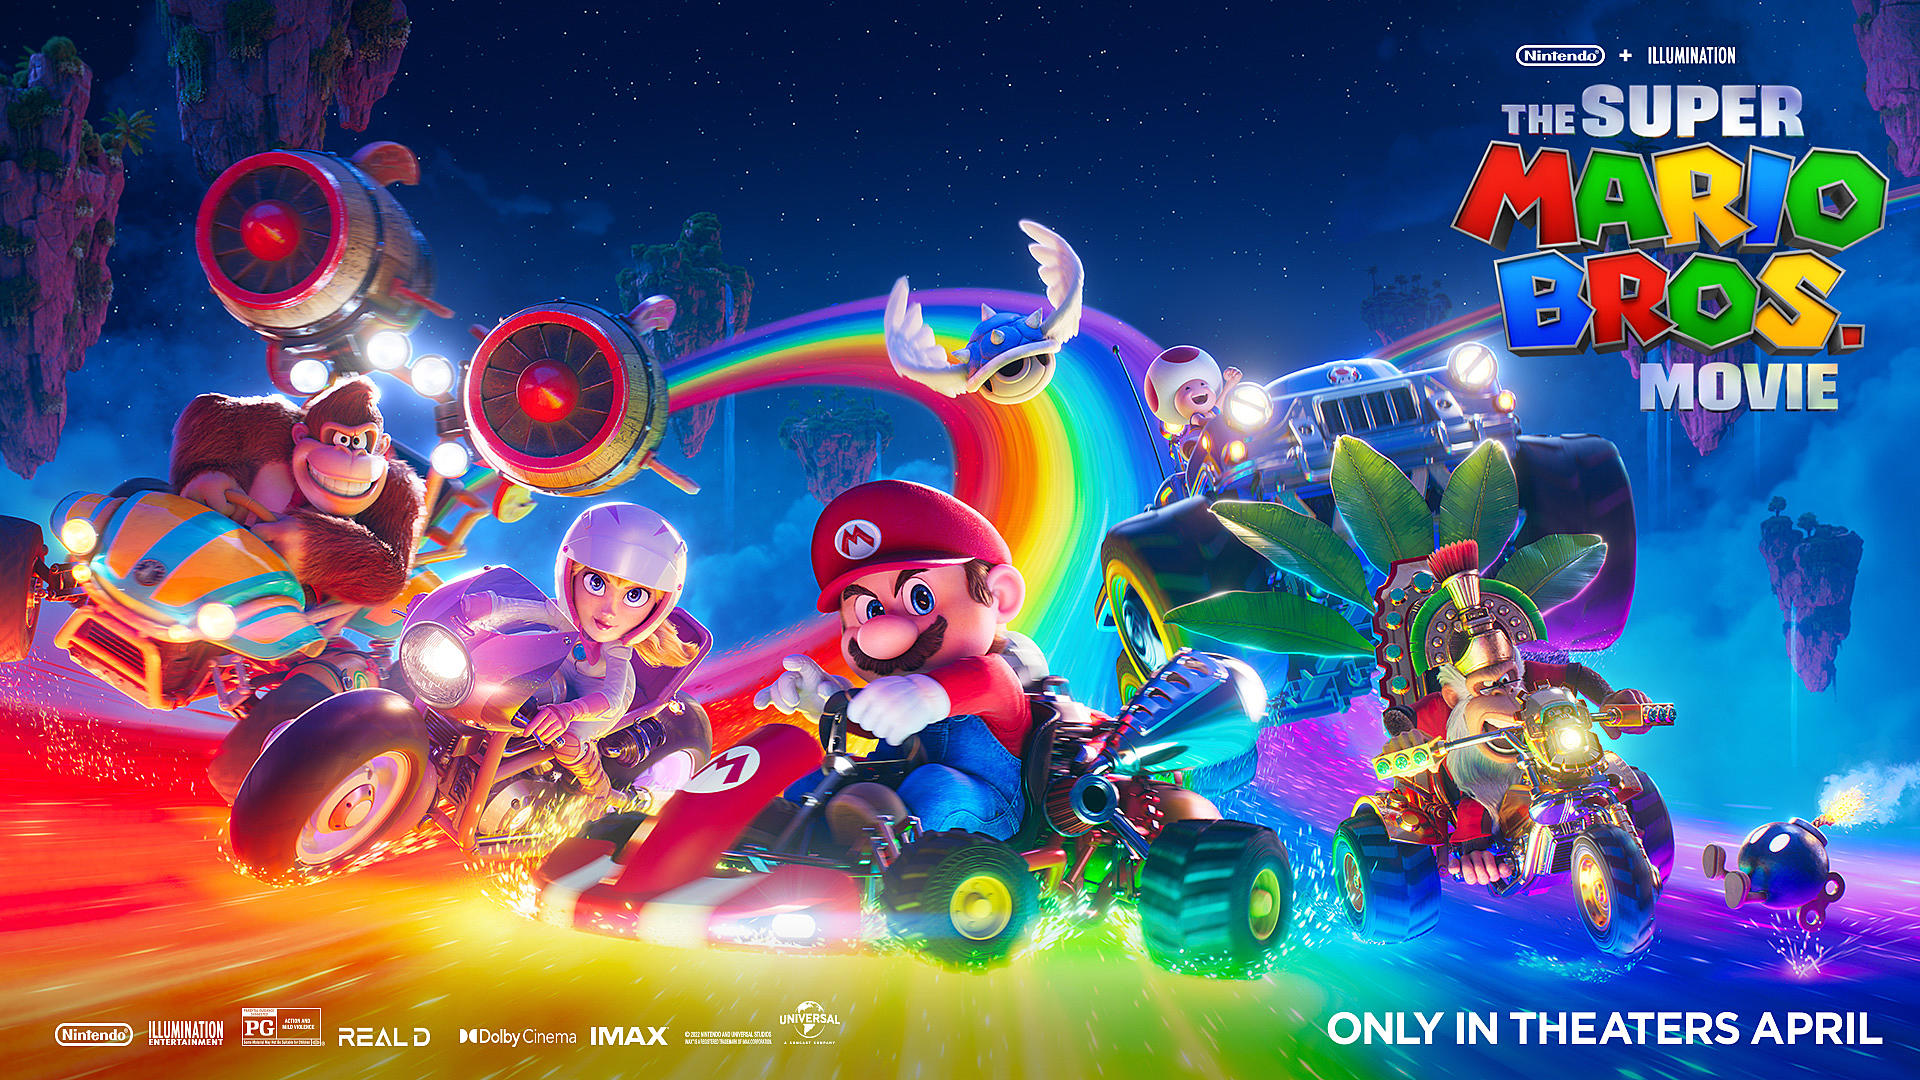 The Race Is On in New 'Super Mario Bros. Movie' Poster